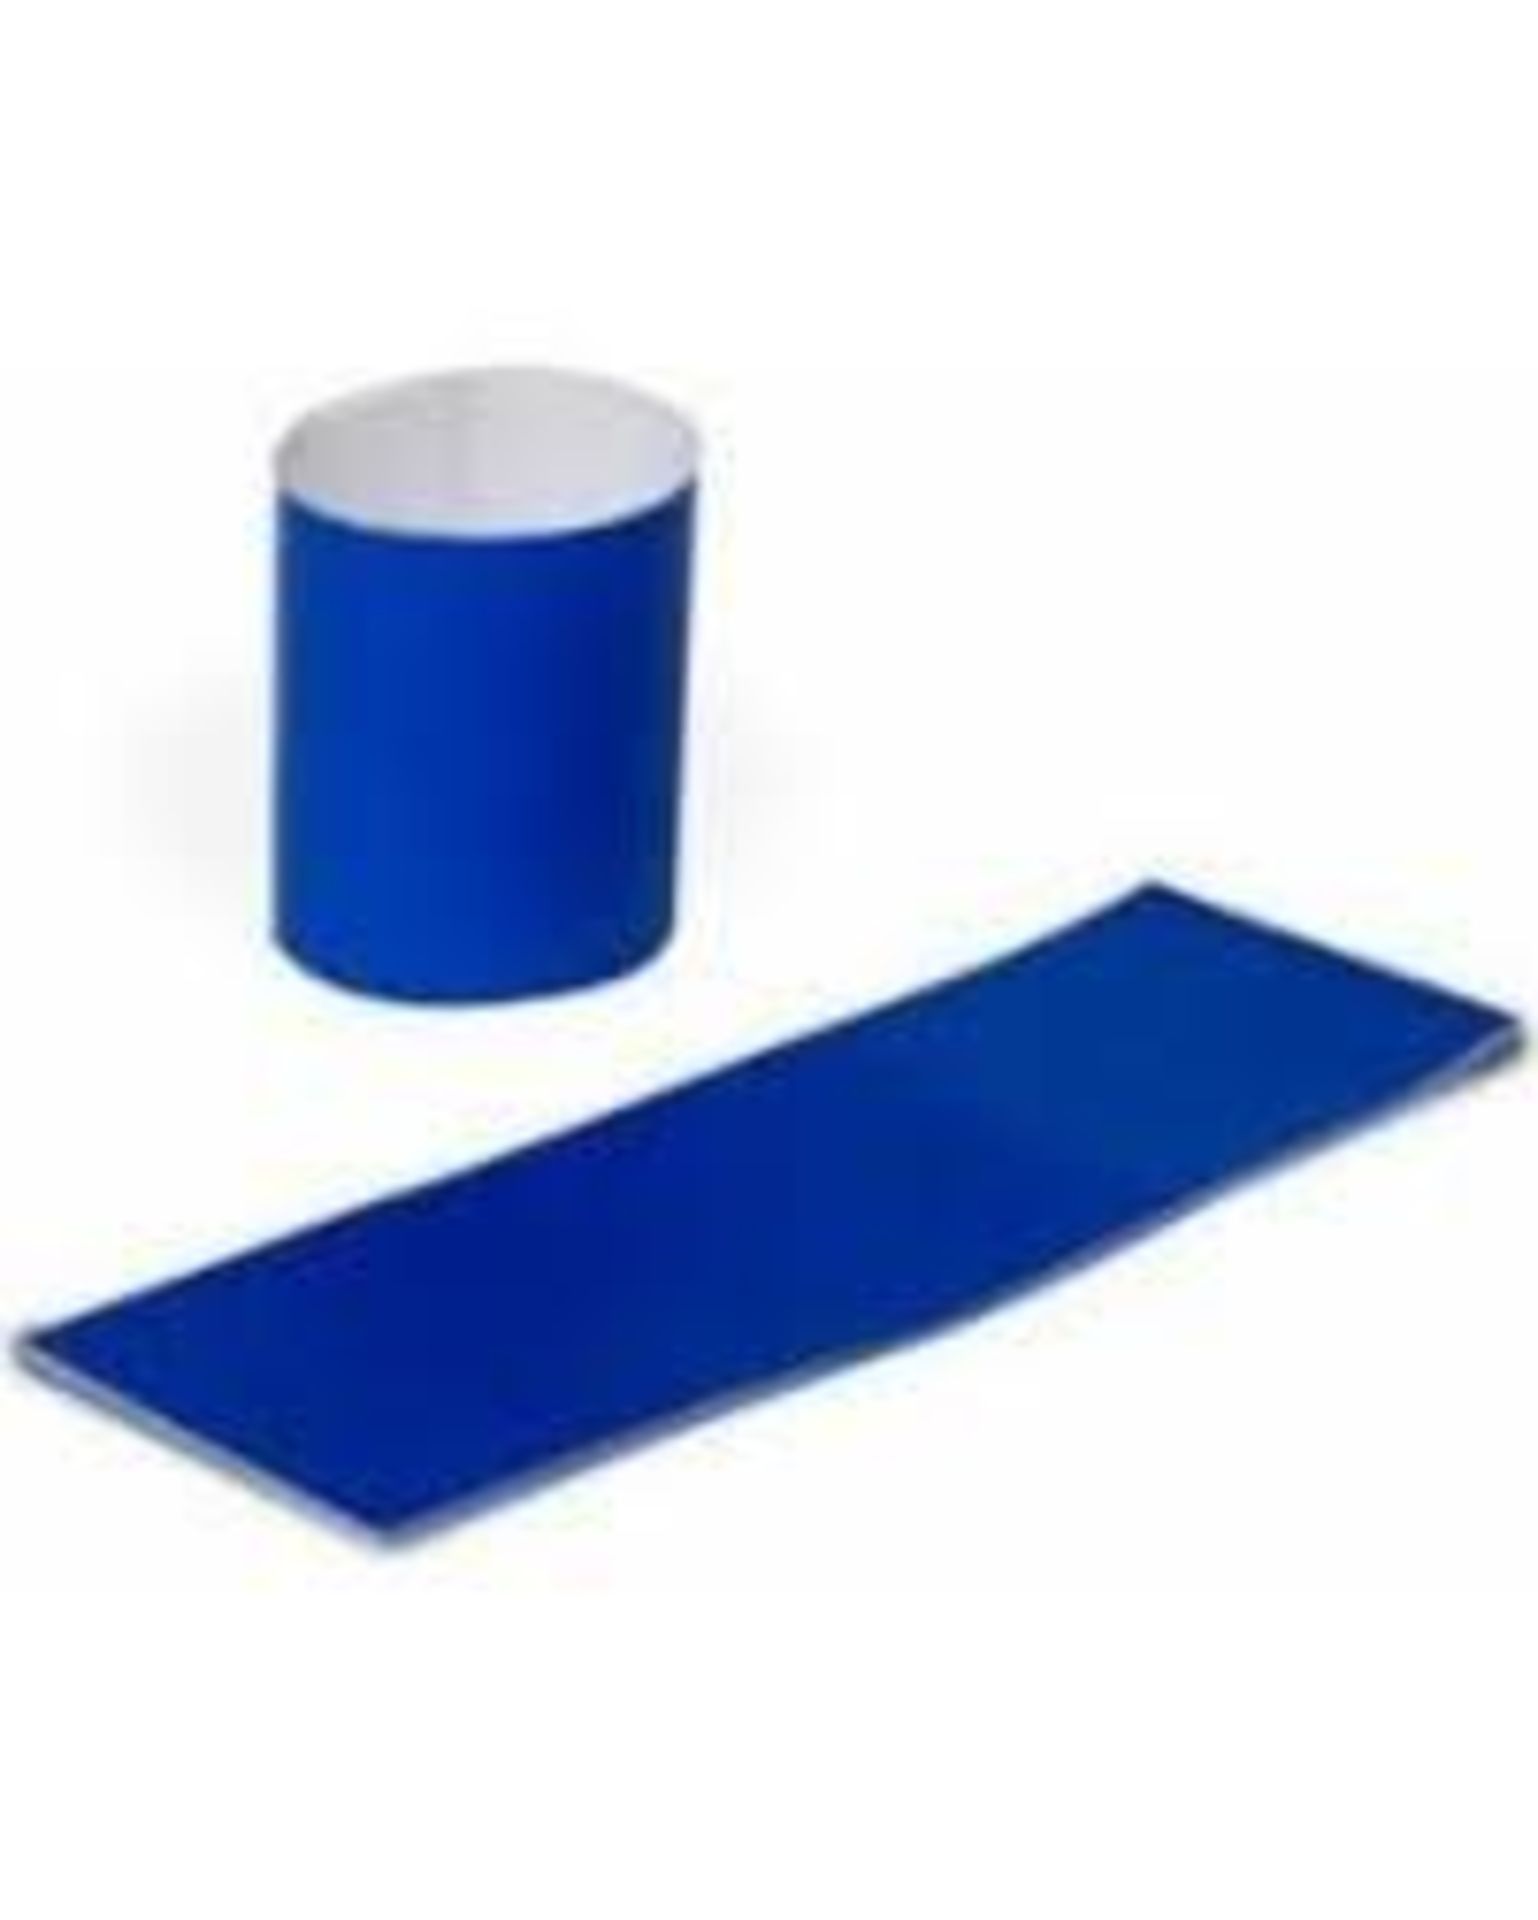 12,500 x Blue Royal Napkin Bands - Includes 5 x Boxes of 2,500 - Product Code RNB20MN - Brand New Se - Image 4 of 4